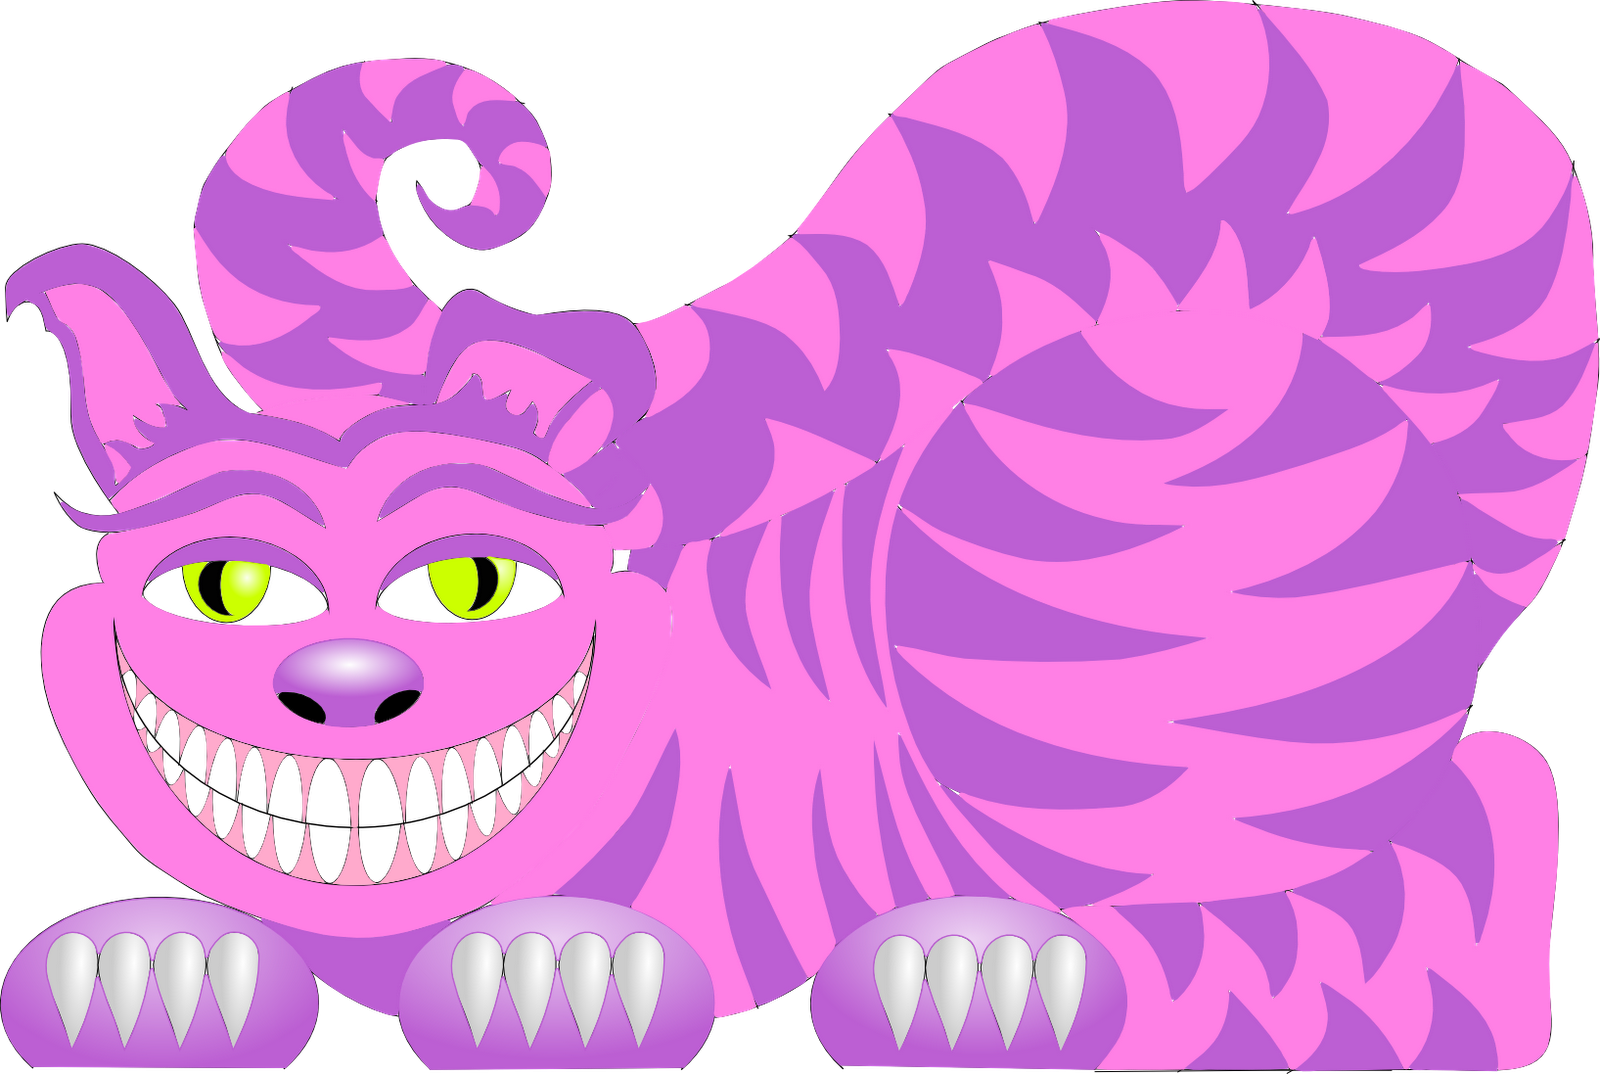 Download PNG image - Cheshire Cat PNG Clipart 